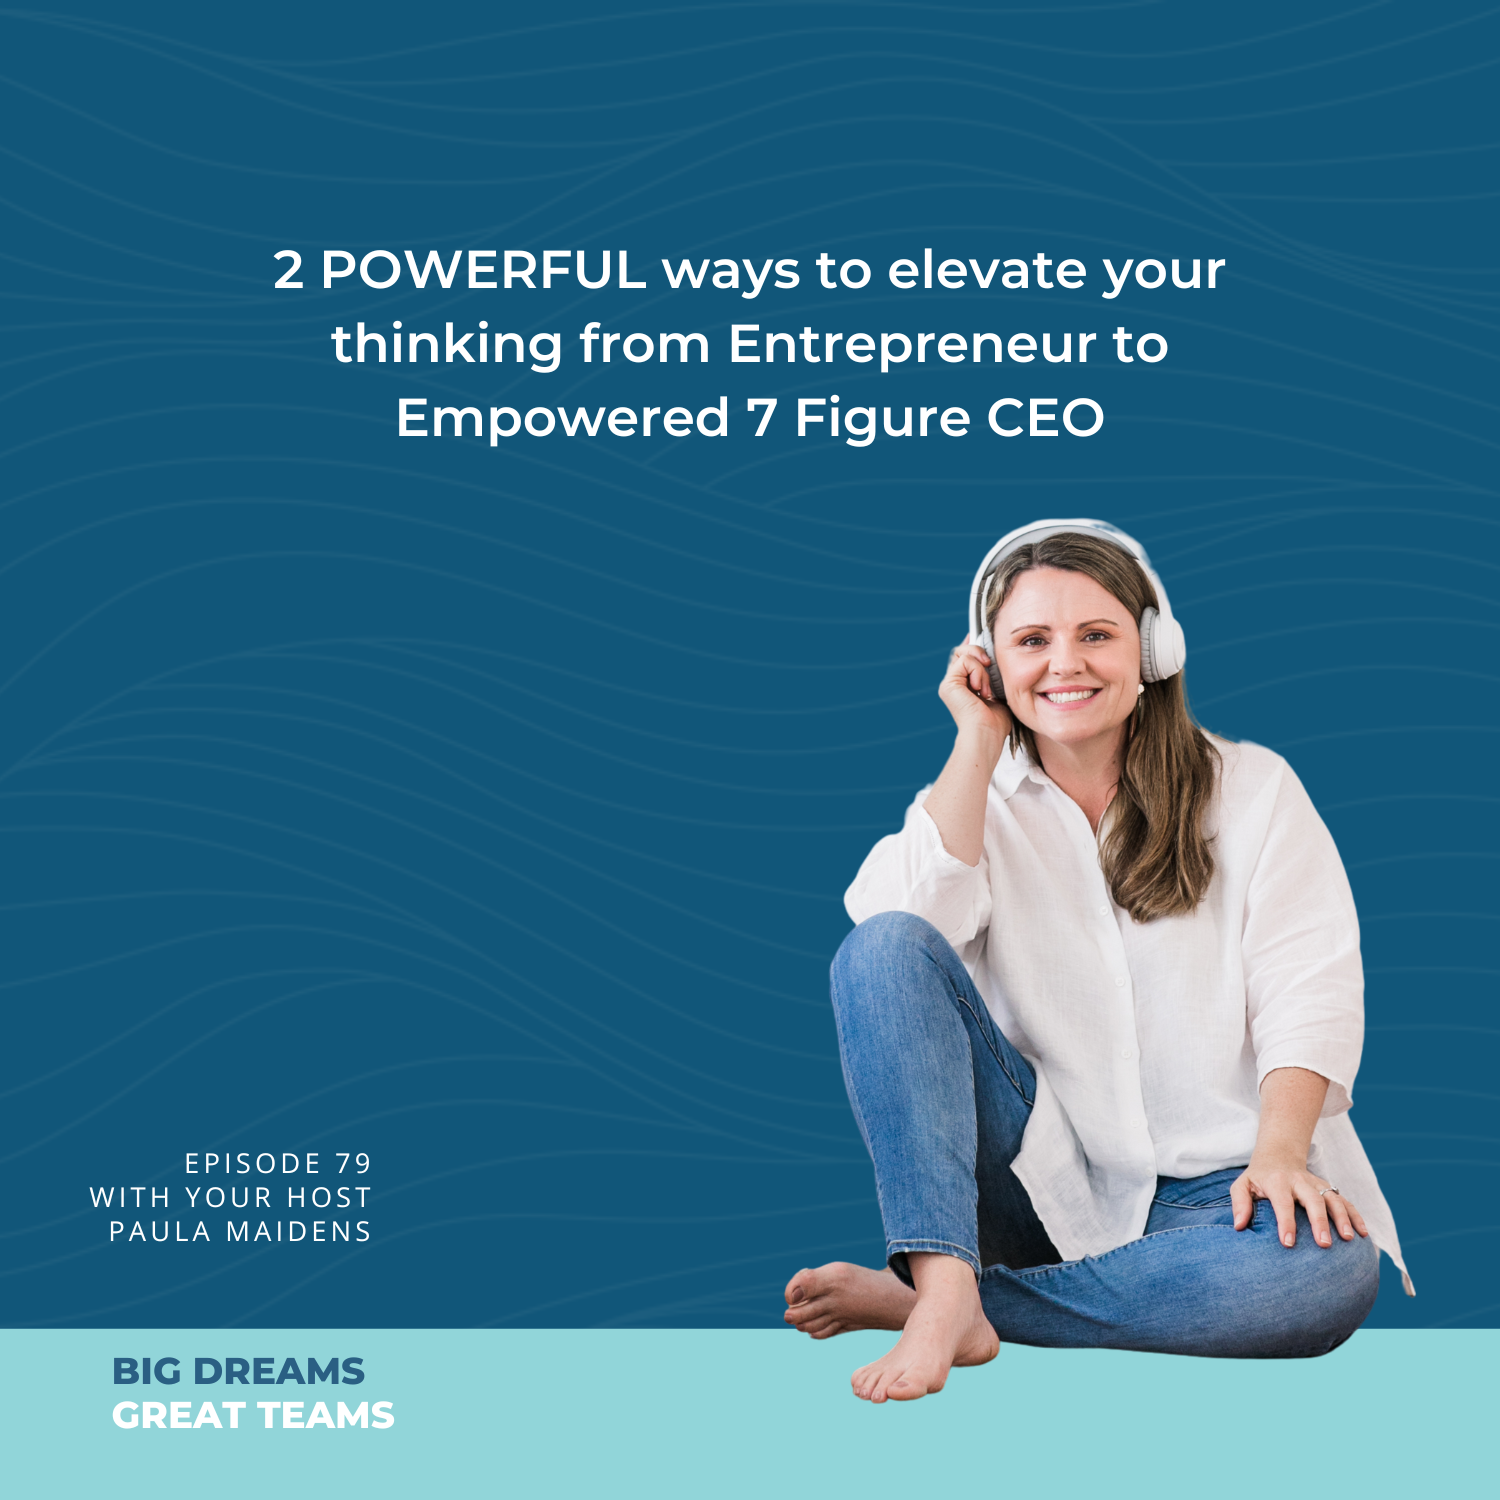 EP 79 2 POWERFUL ways to Elevate Your Thinking From Entrepreneur to Empowered 7 Figure CEO